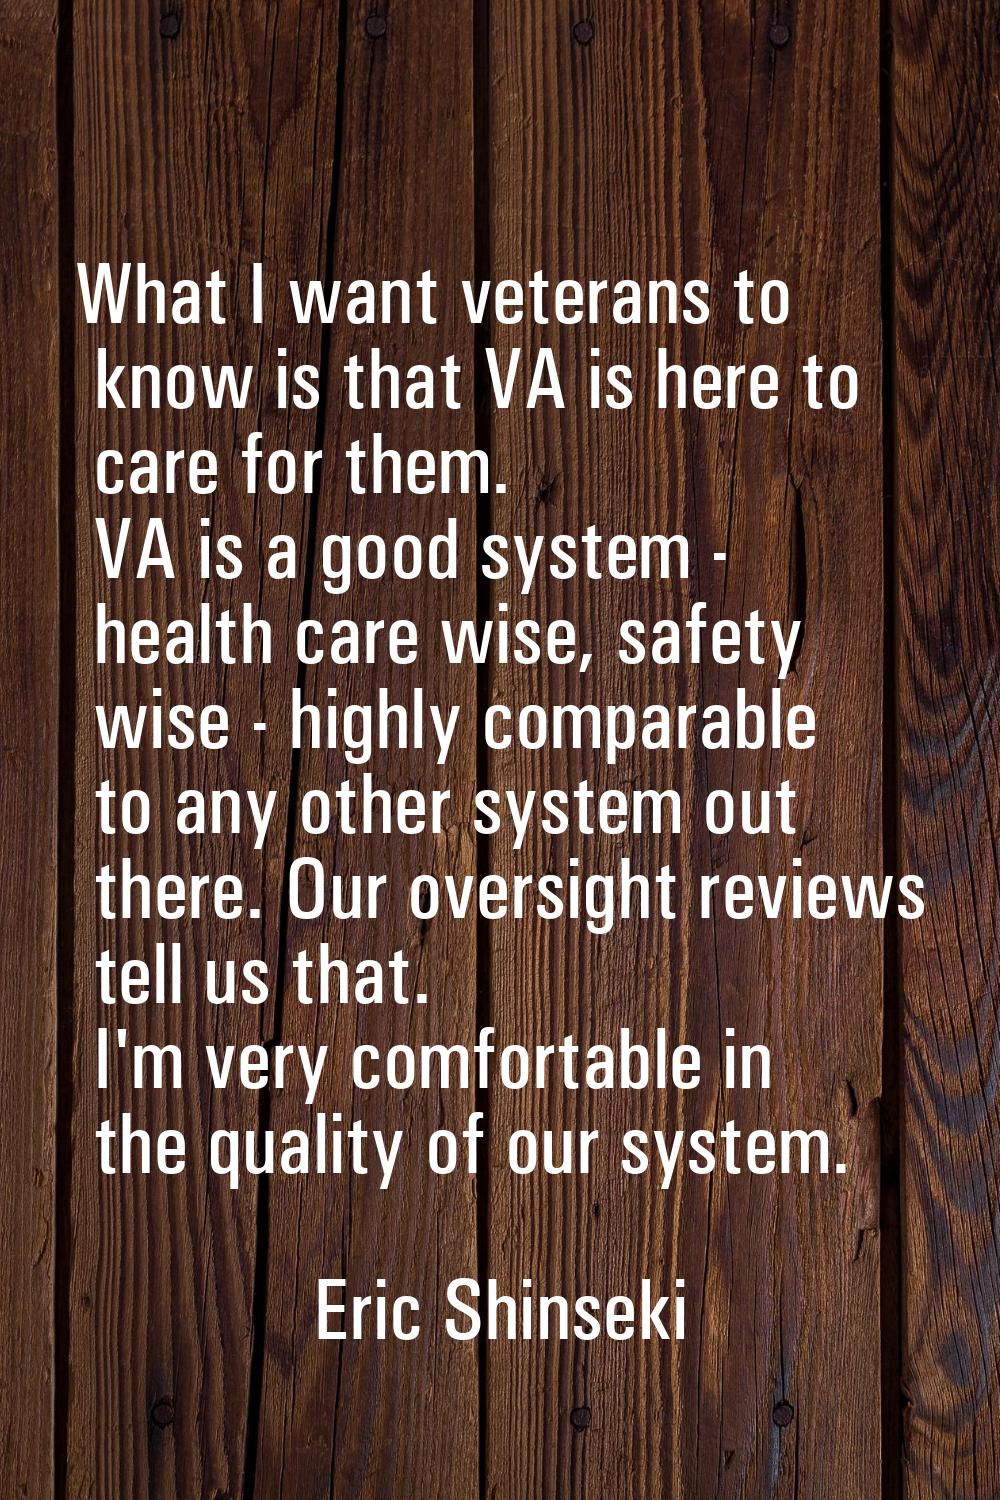 What I want veterans to know is that VA is here to care for them. VA is a good system - health care